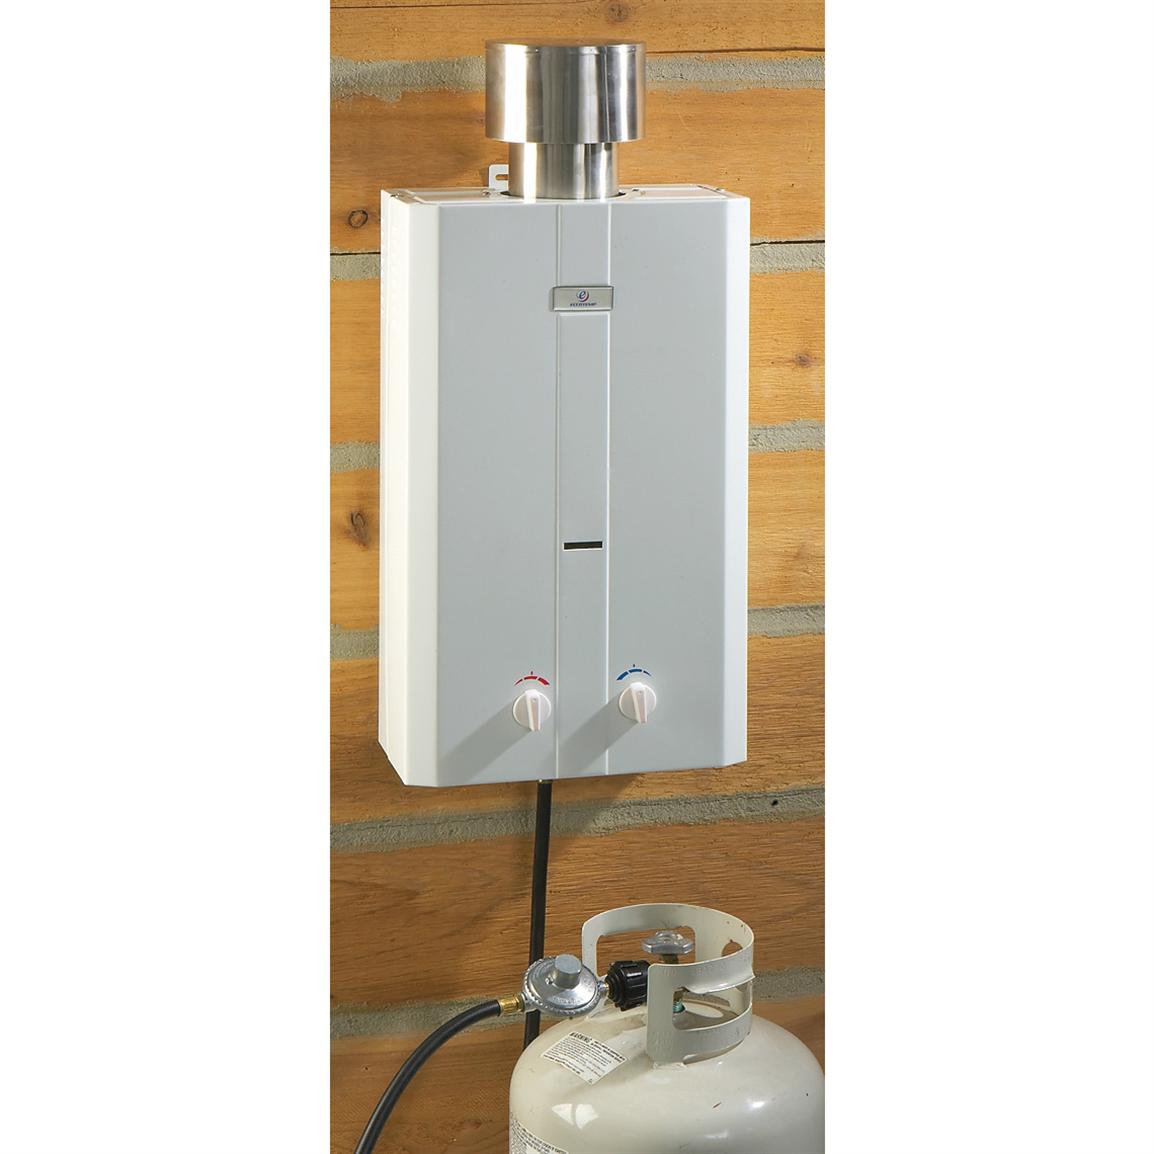 Eccotemp L10 Portable Outdoor Tankless Water Heater - 145247, Portable